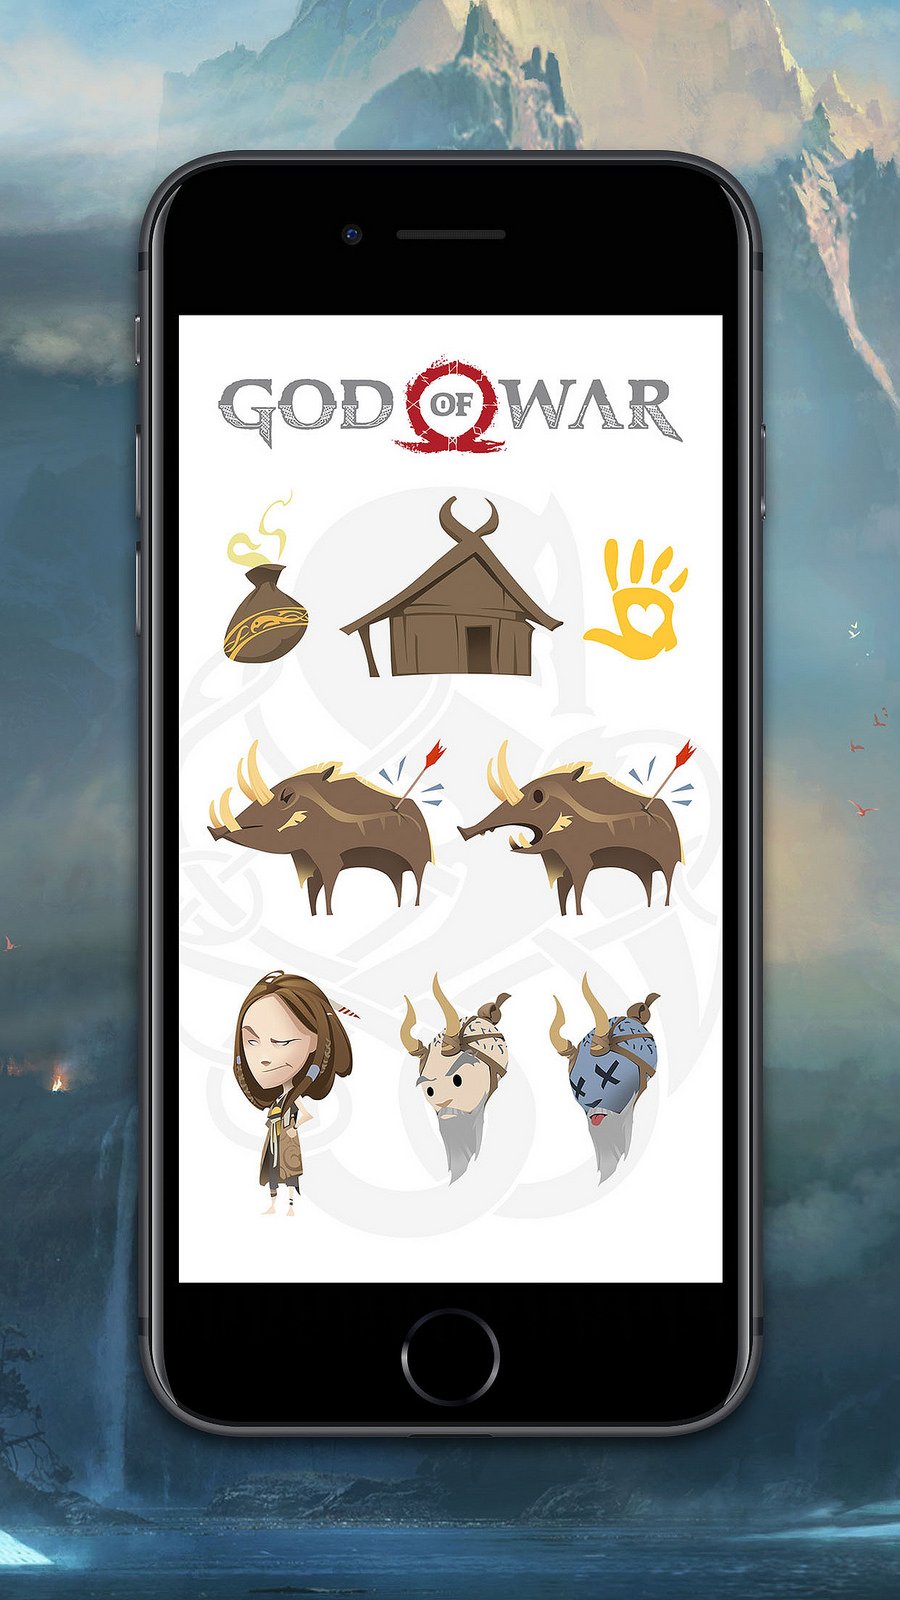 God-of-War-stickers-mobiles-04-09-05-2018